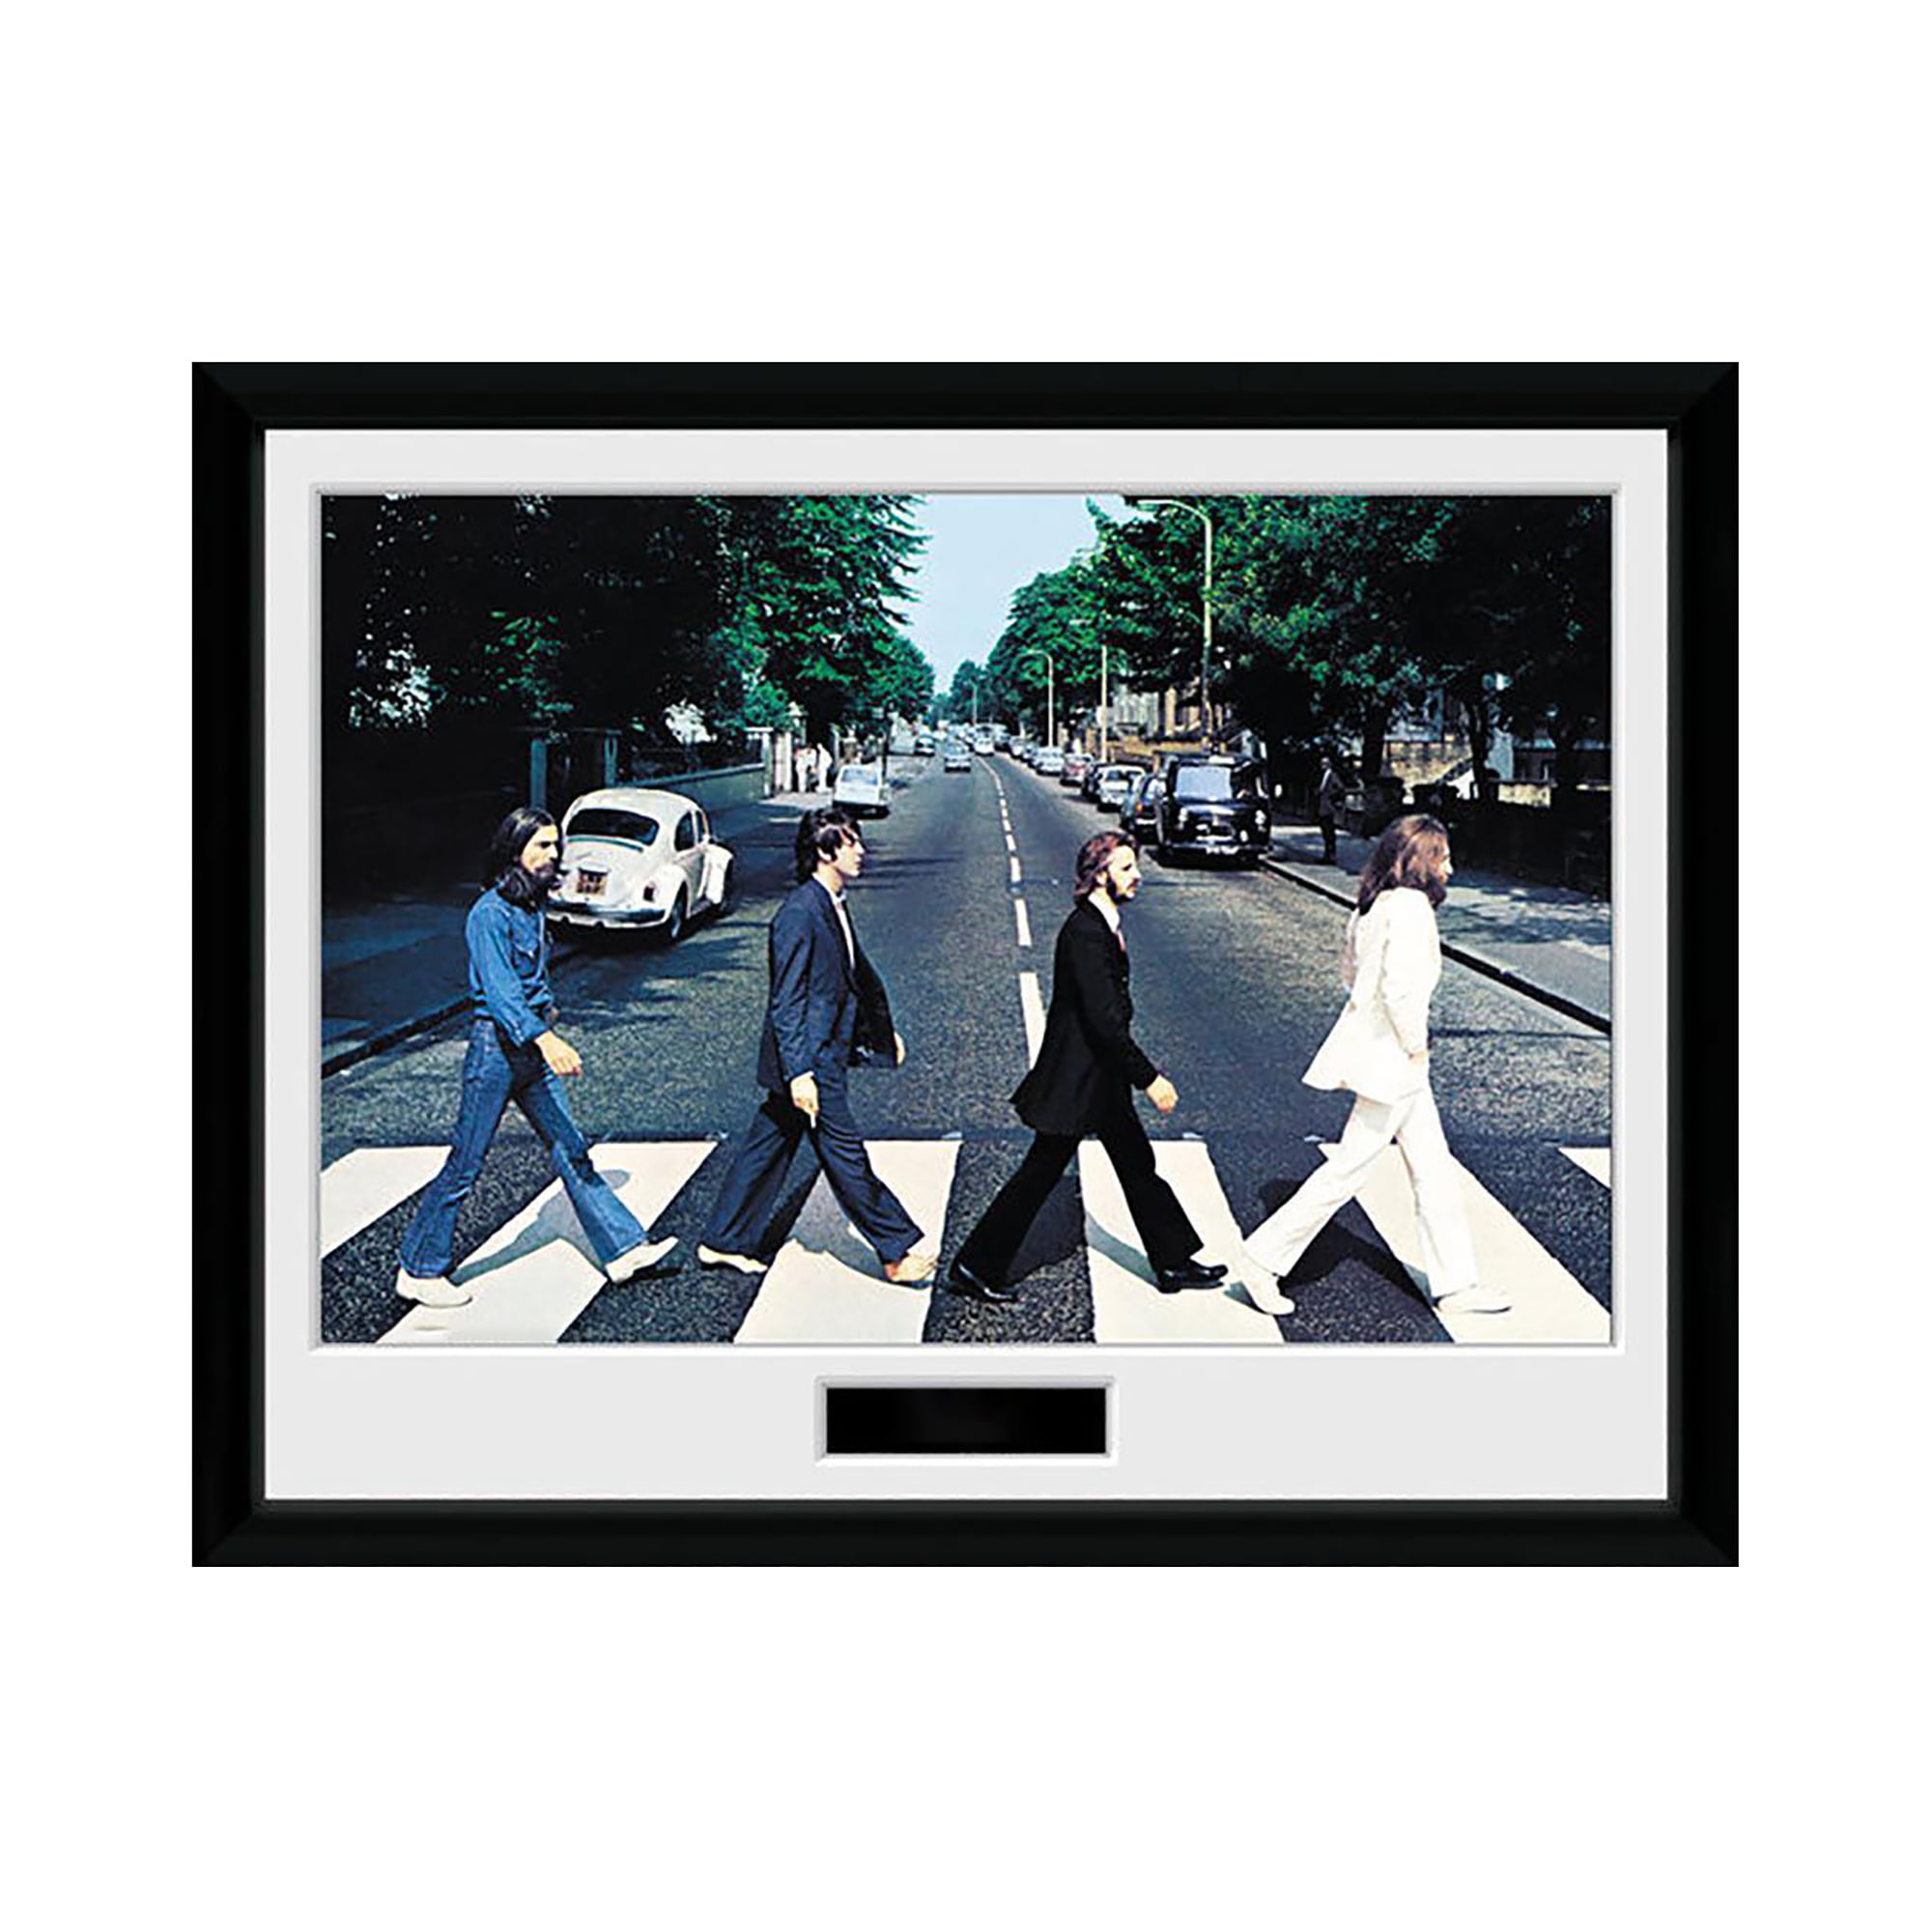 THE BEATLES ABBEY ROAD Picture PRINT ON WOOD FRAMED CANVAS WALL ART DECORATION 